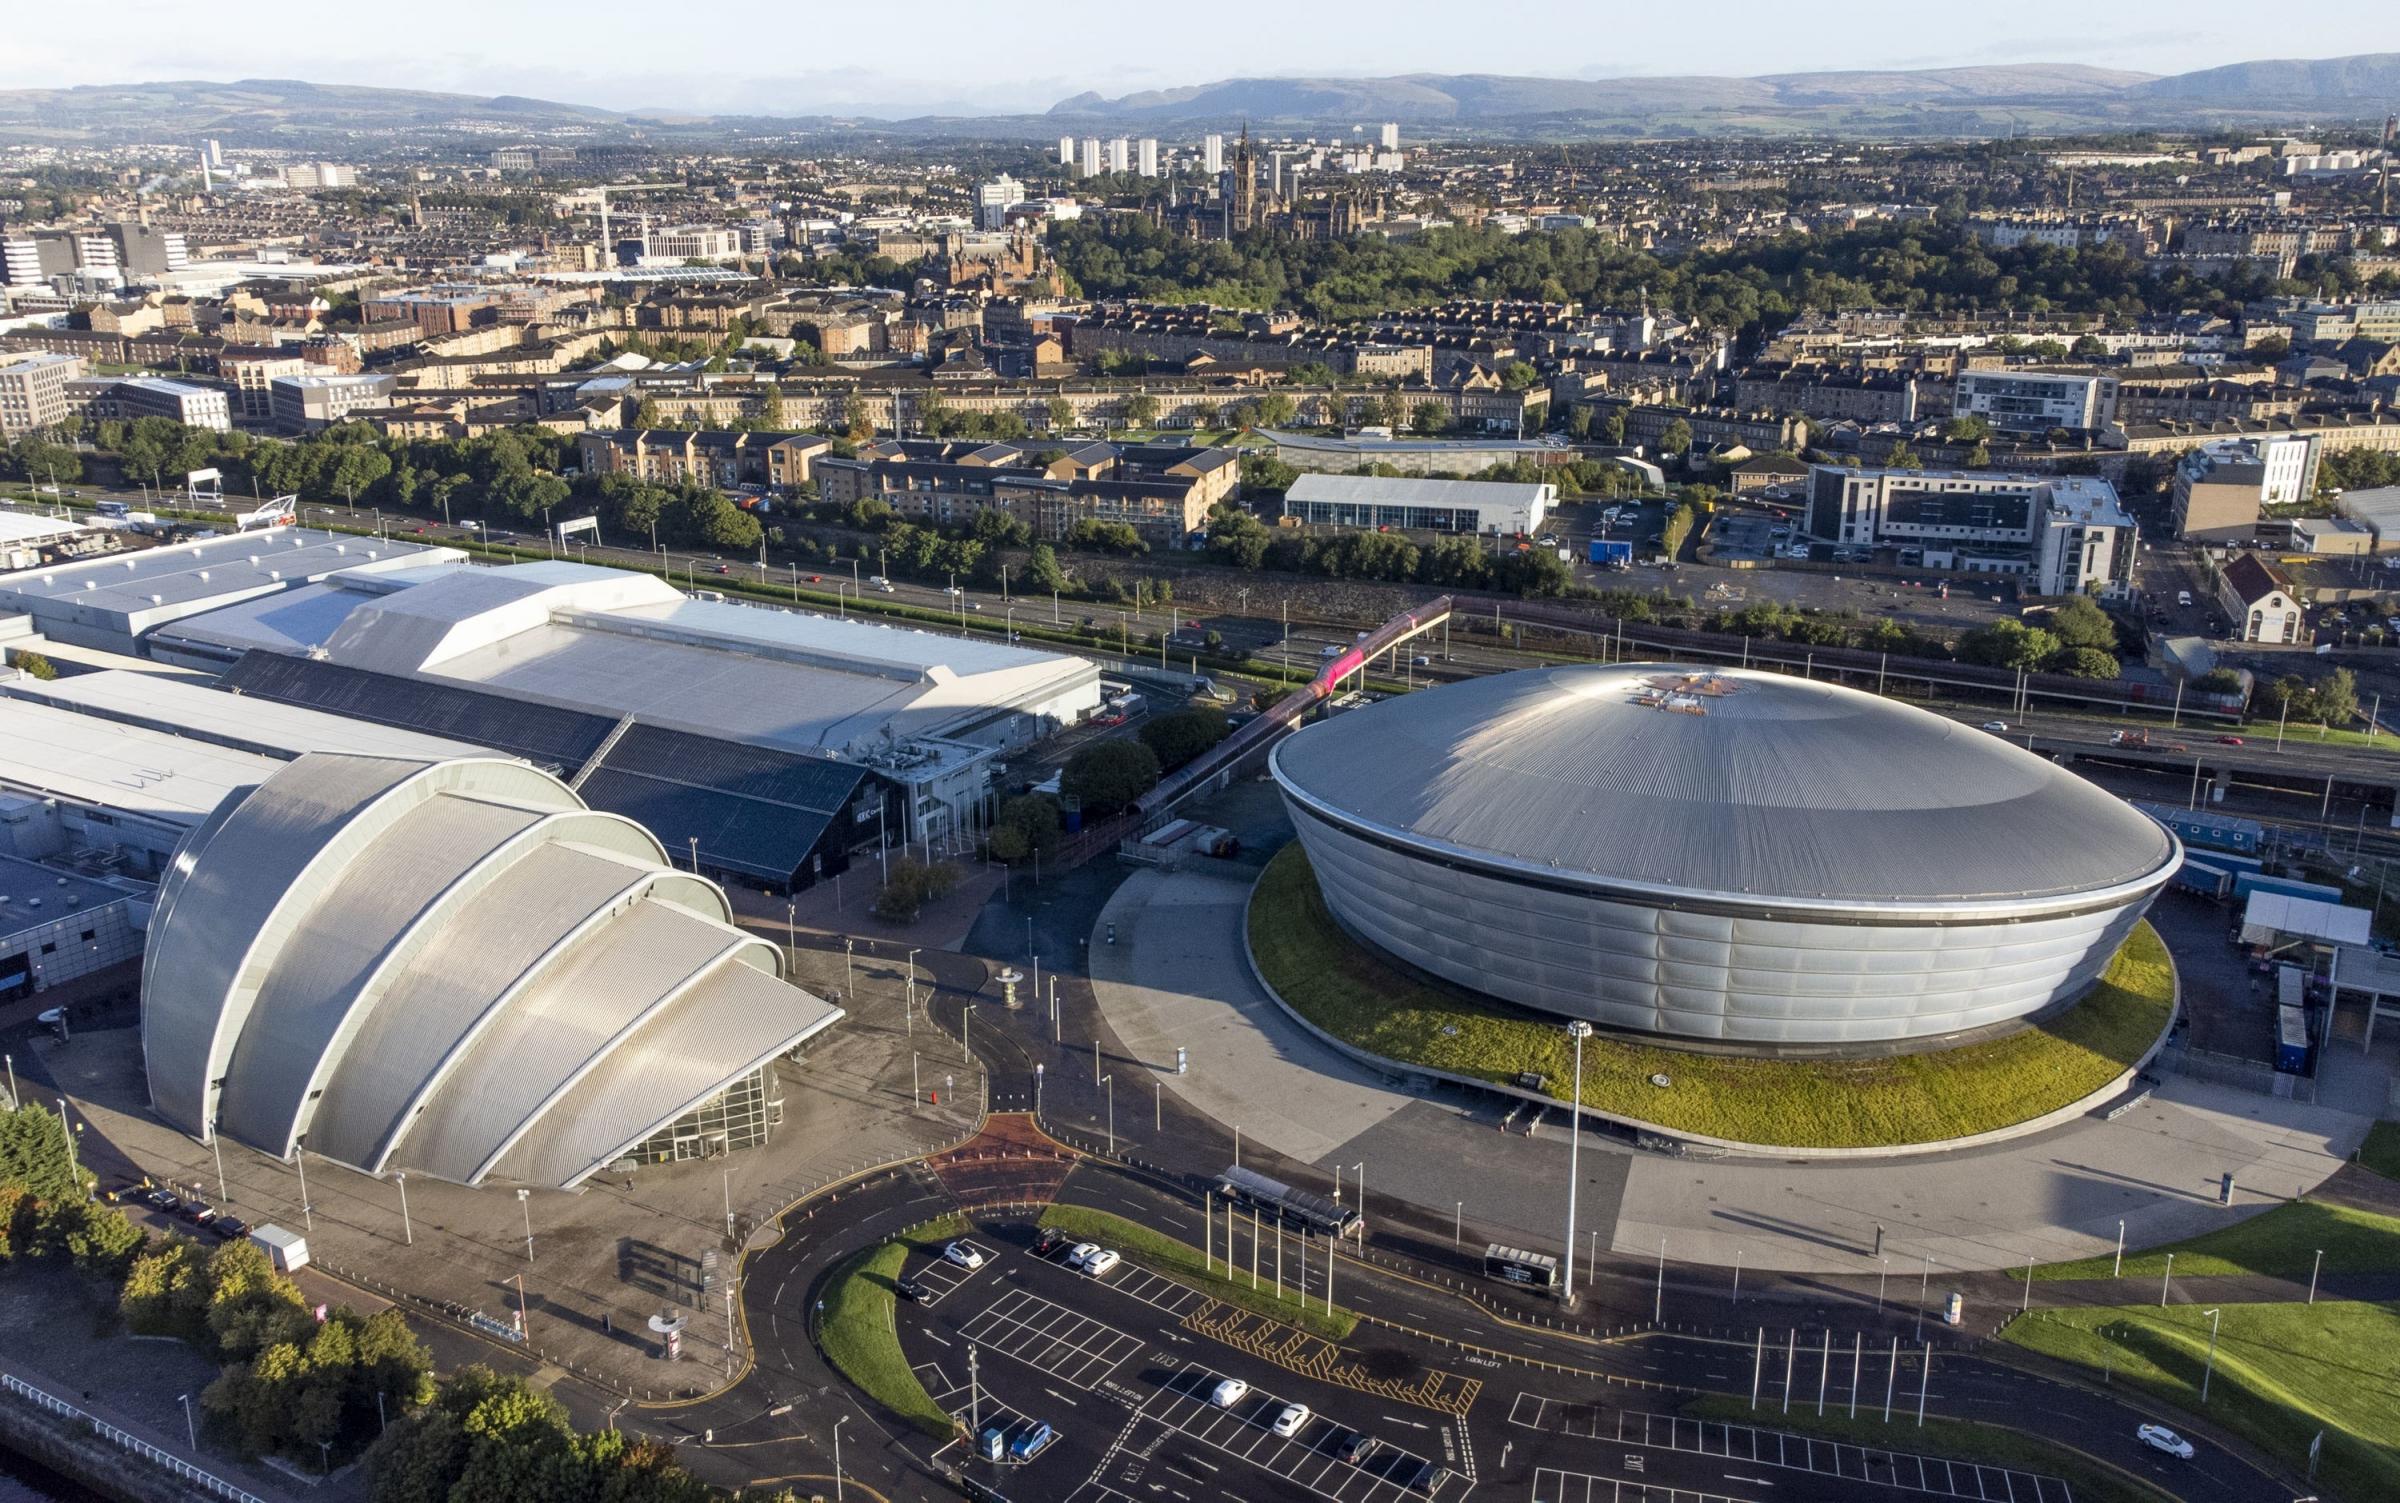 Glasgow is the host city for the COP26 climate summit from November 1 to 12